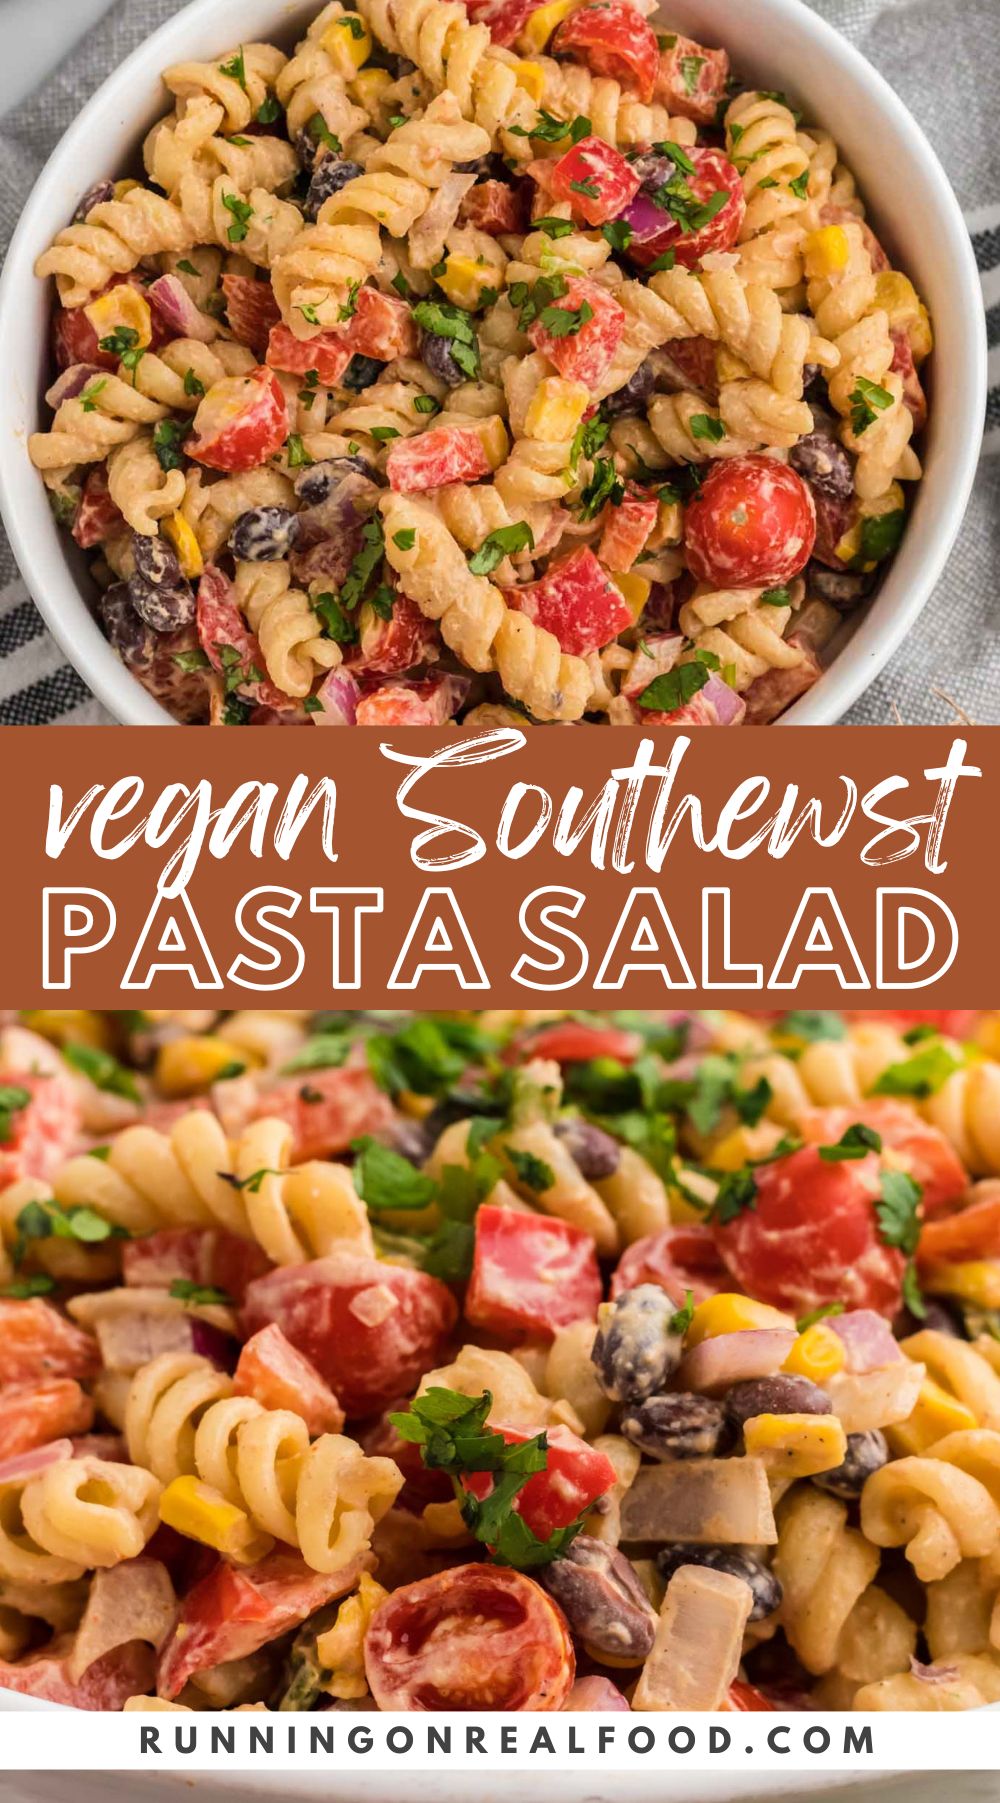 Two images of a Southwest pasta salad with beans, peppers and tomato with a text graphic in between them reading "vegan southwest pasta salad".